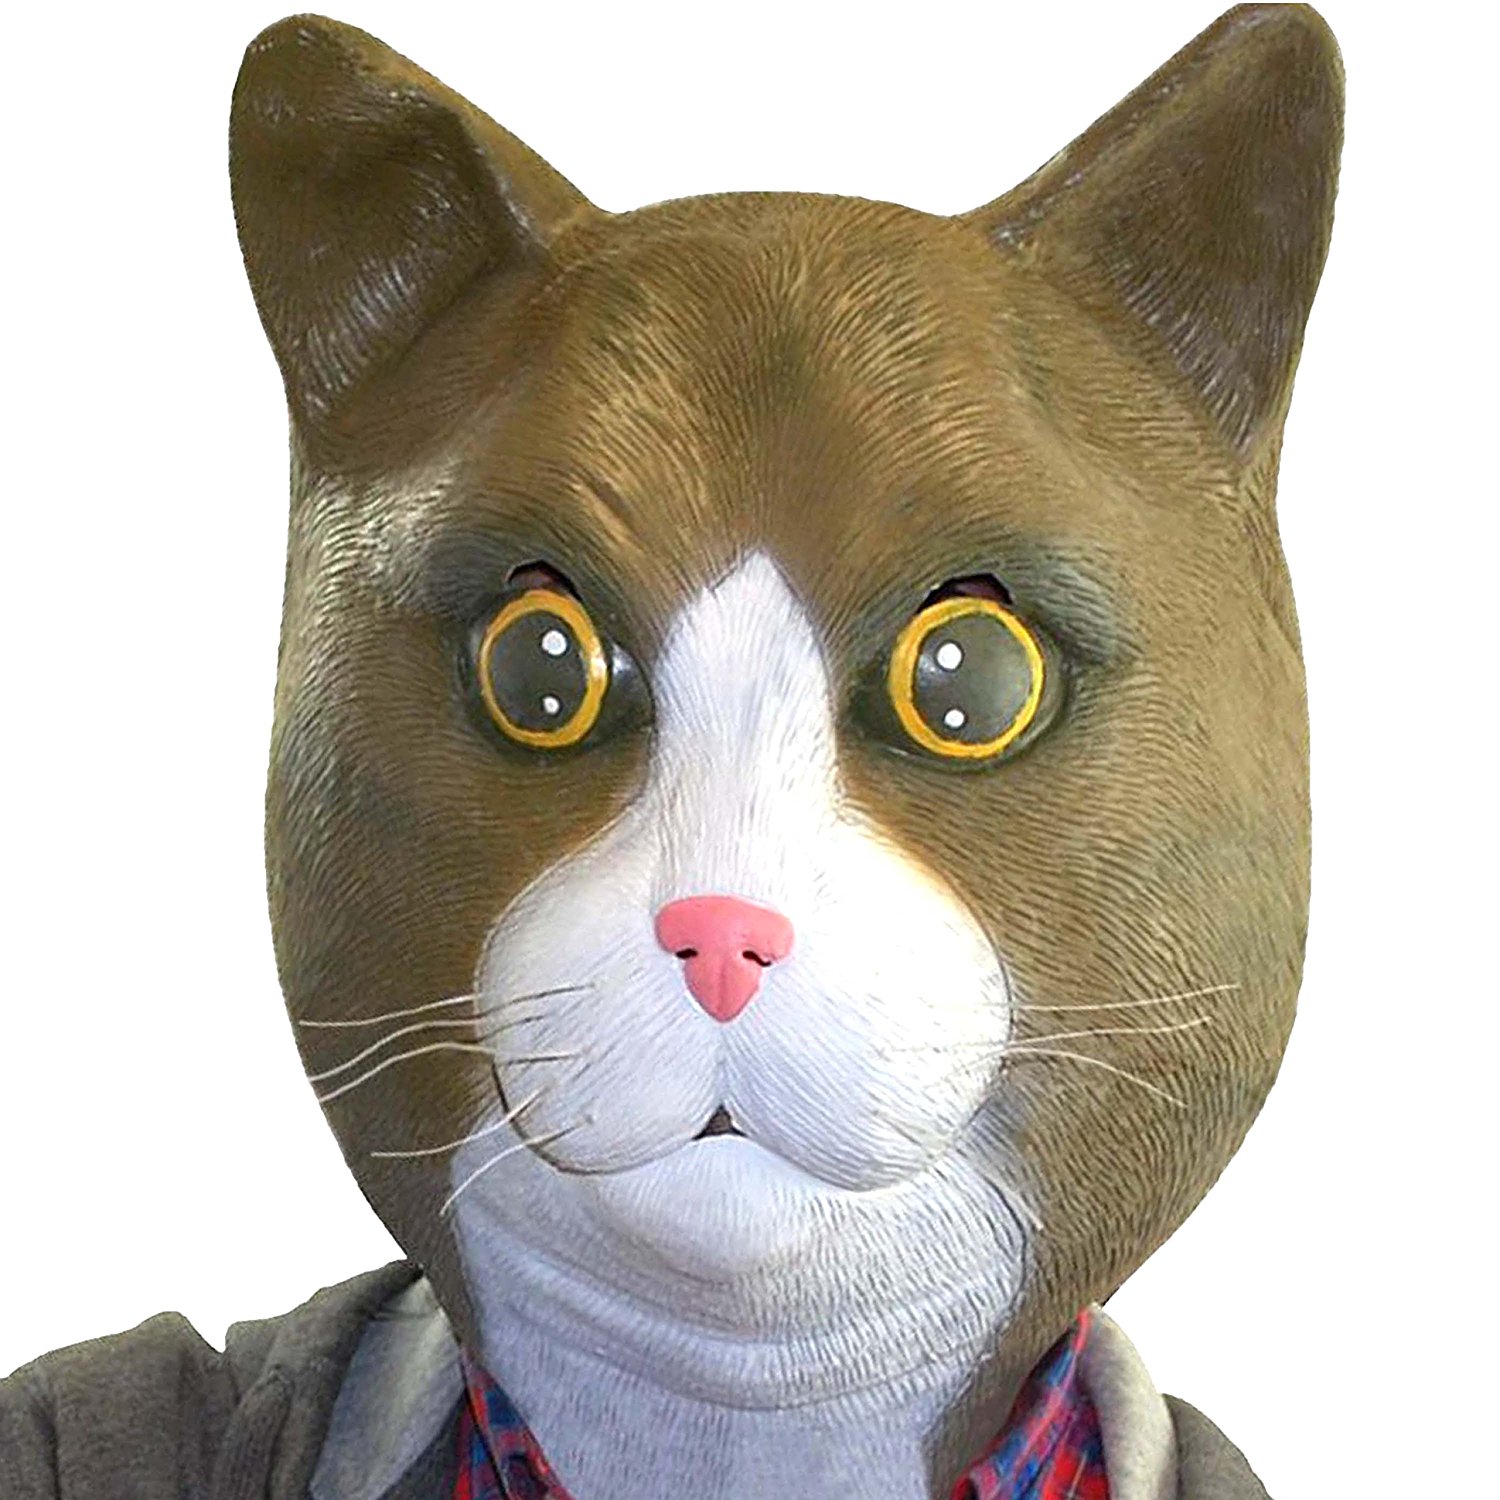 Amazon.com: BigMouth Inc Buster Brown The Cat Mask: Toys & Games